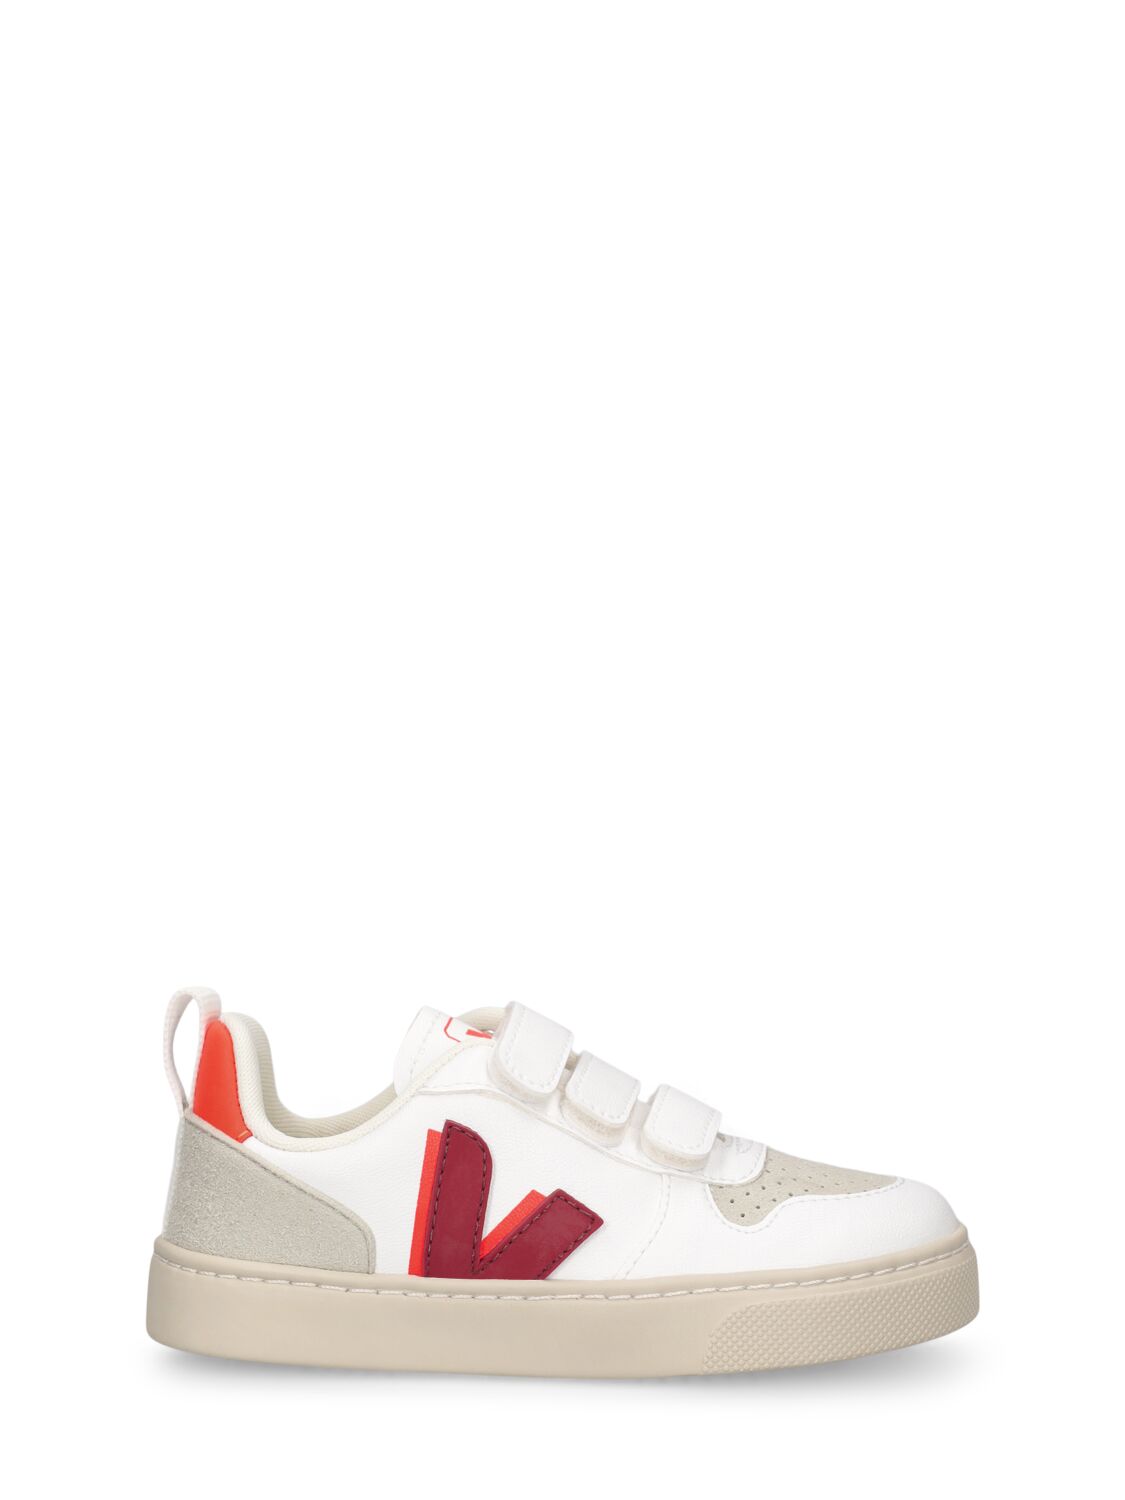 Veja Kids' V10 Chrome-free Leather Trainers In White,red